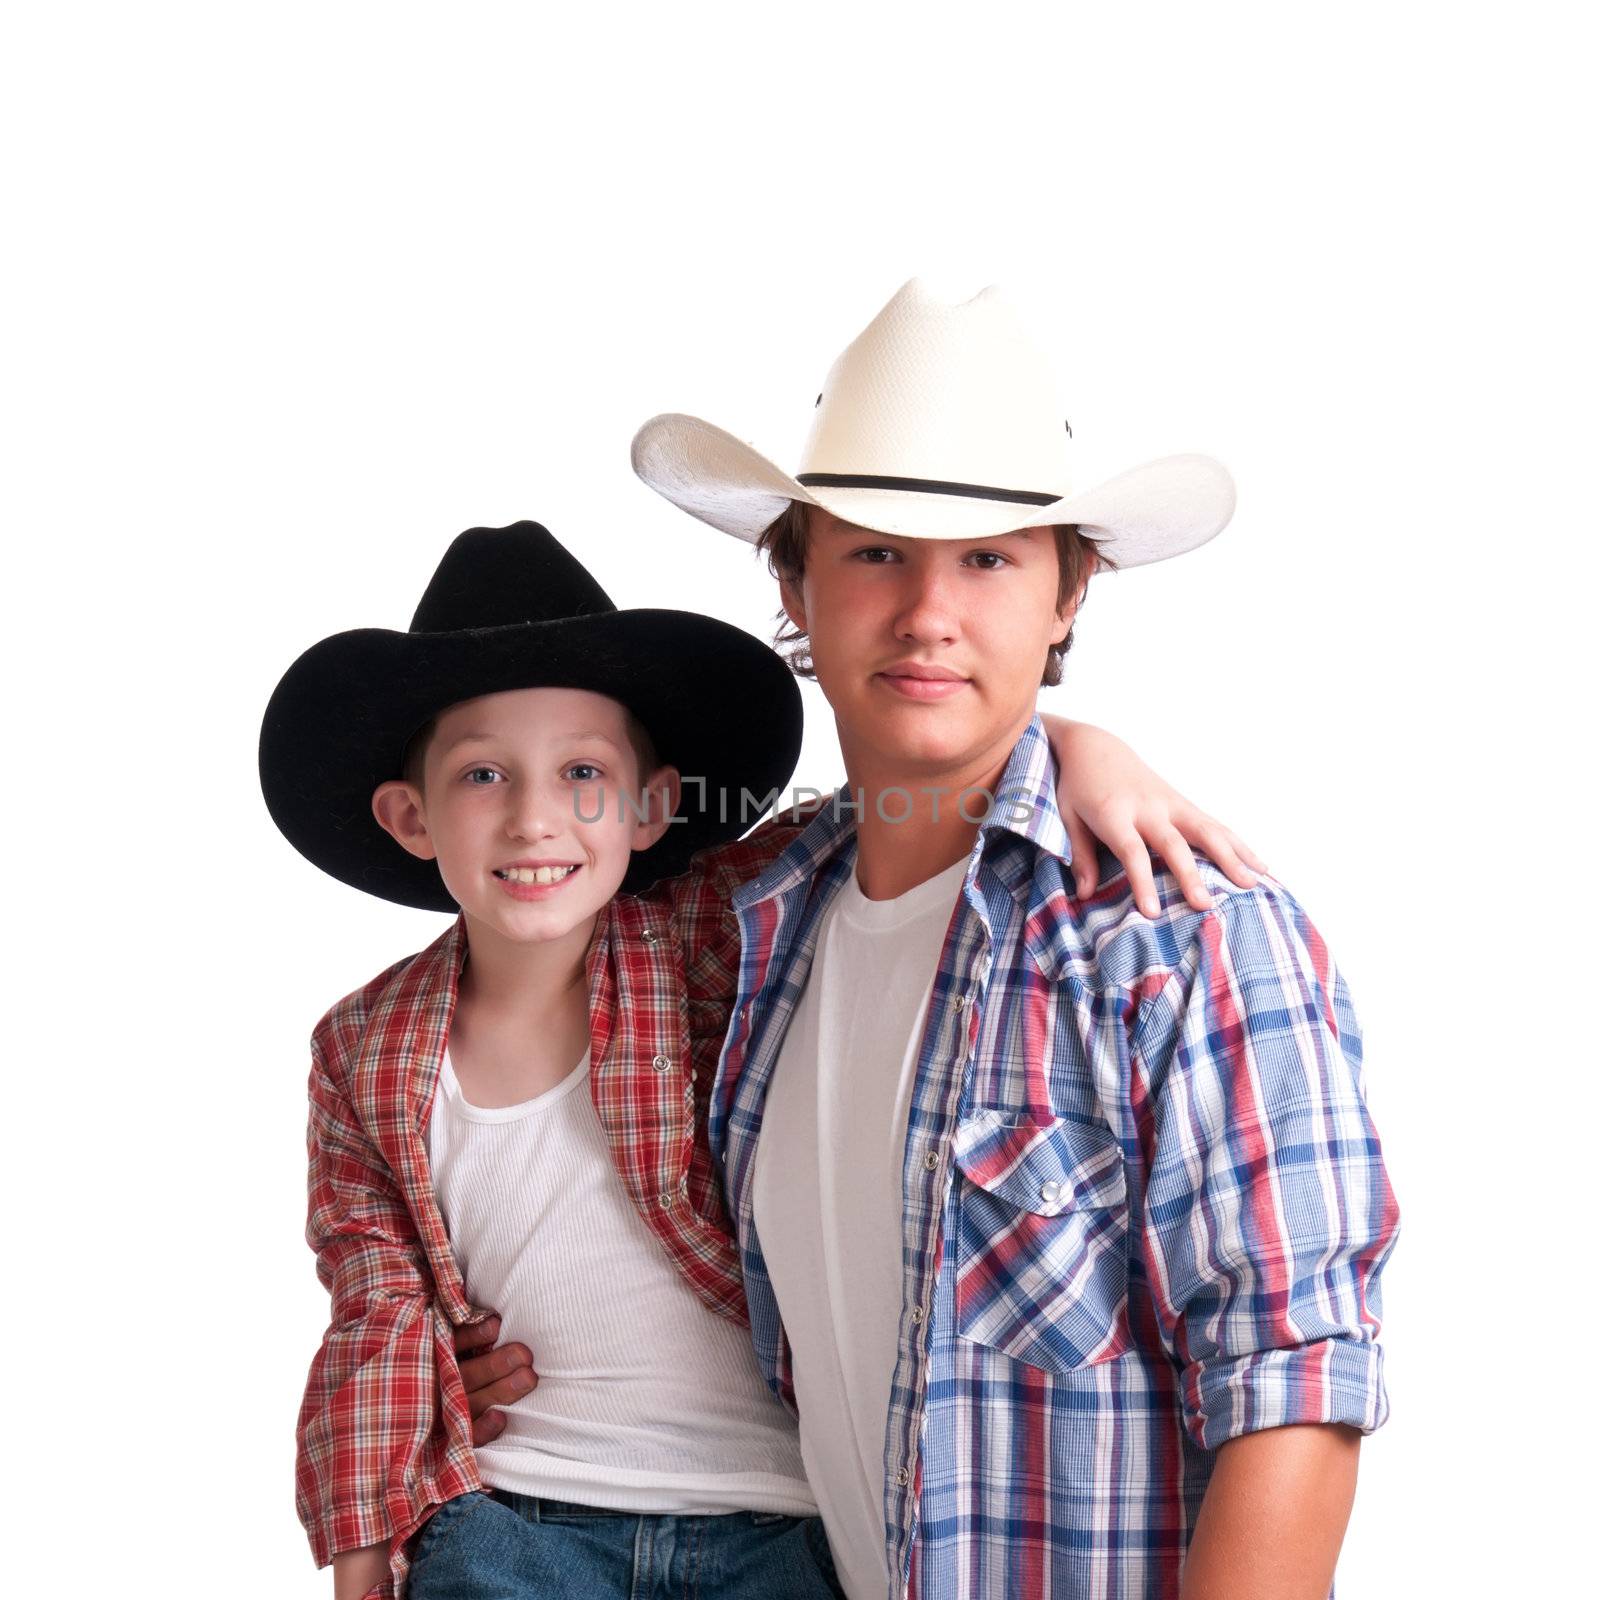 Cowboy Uncle and Nephew by rcarner